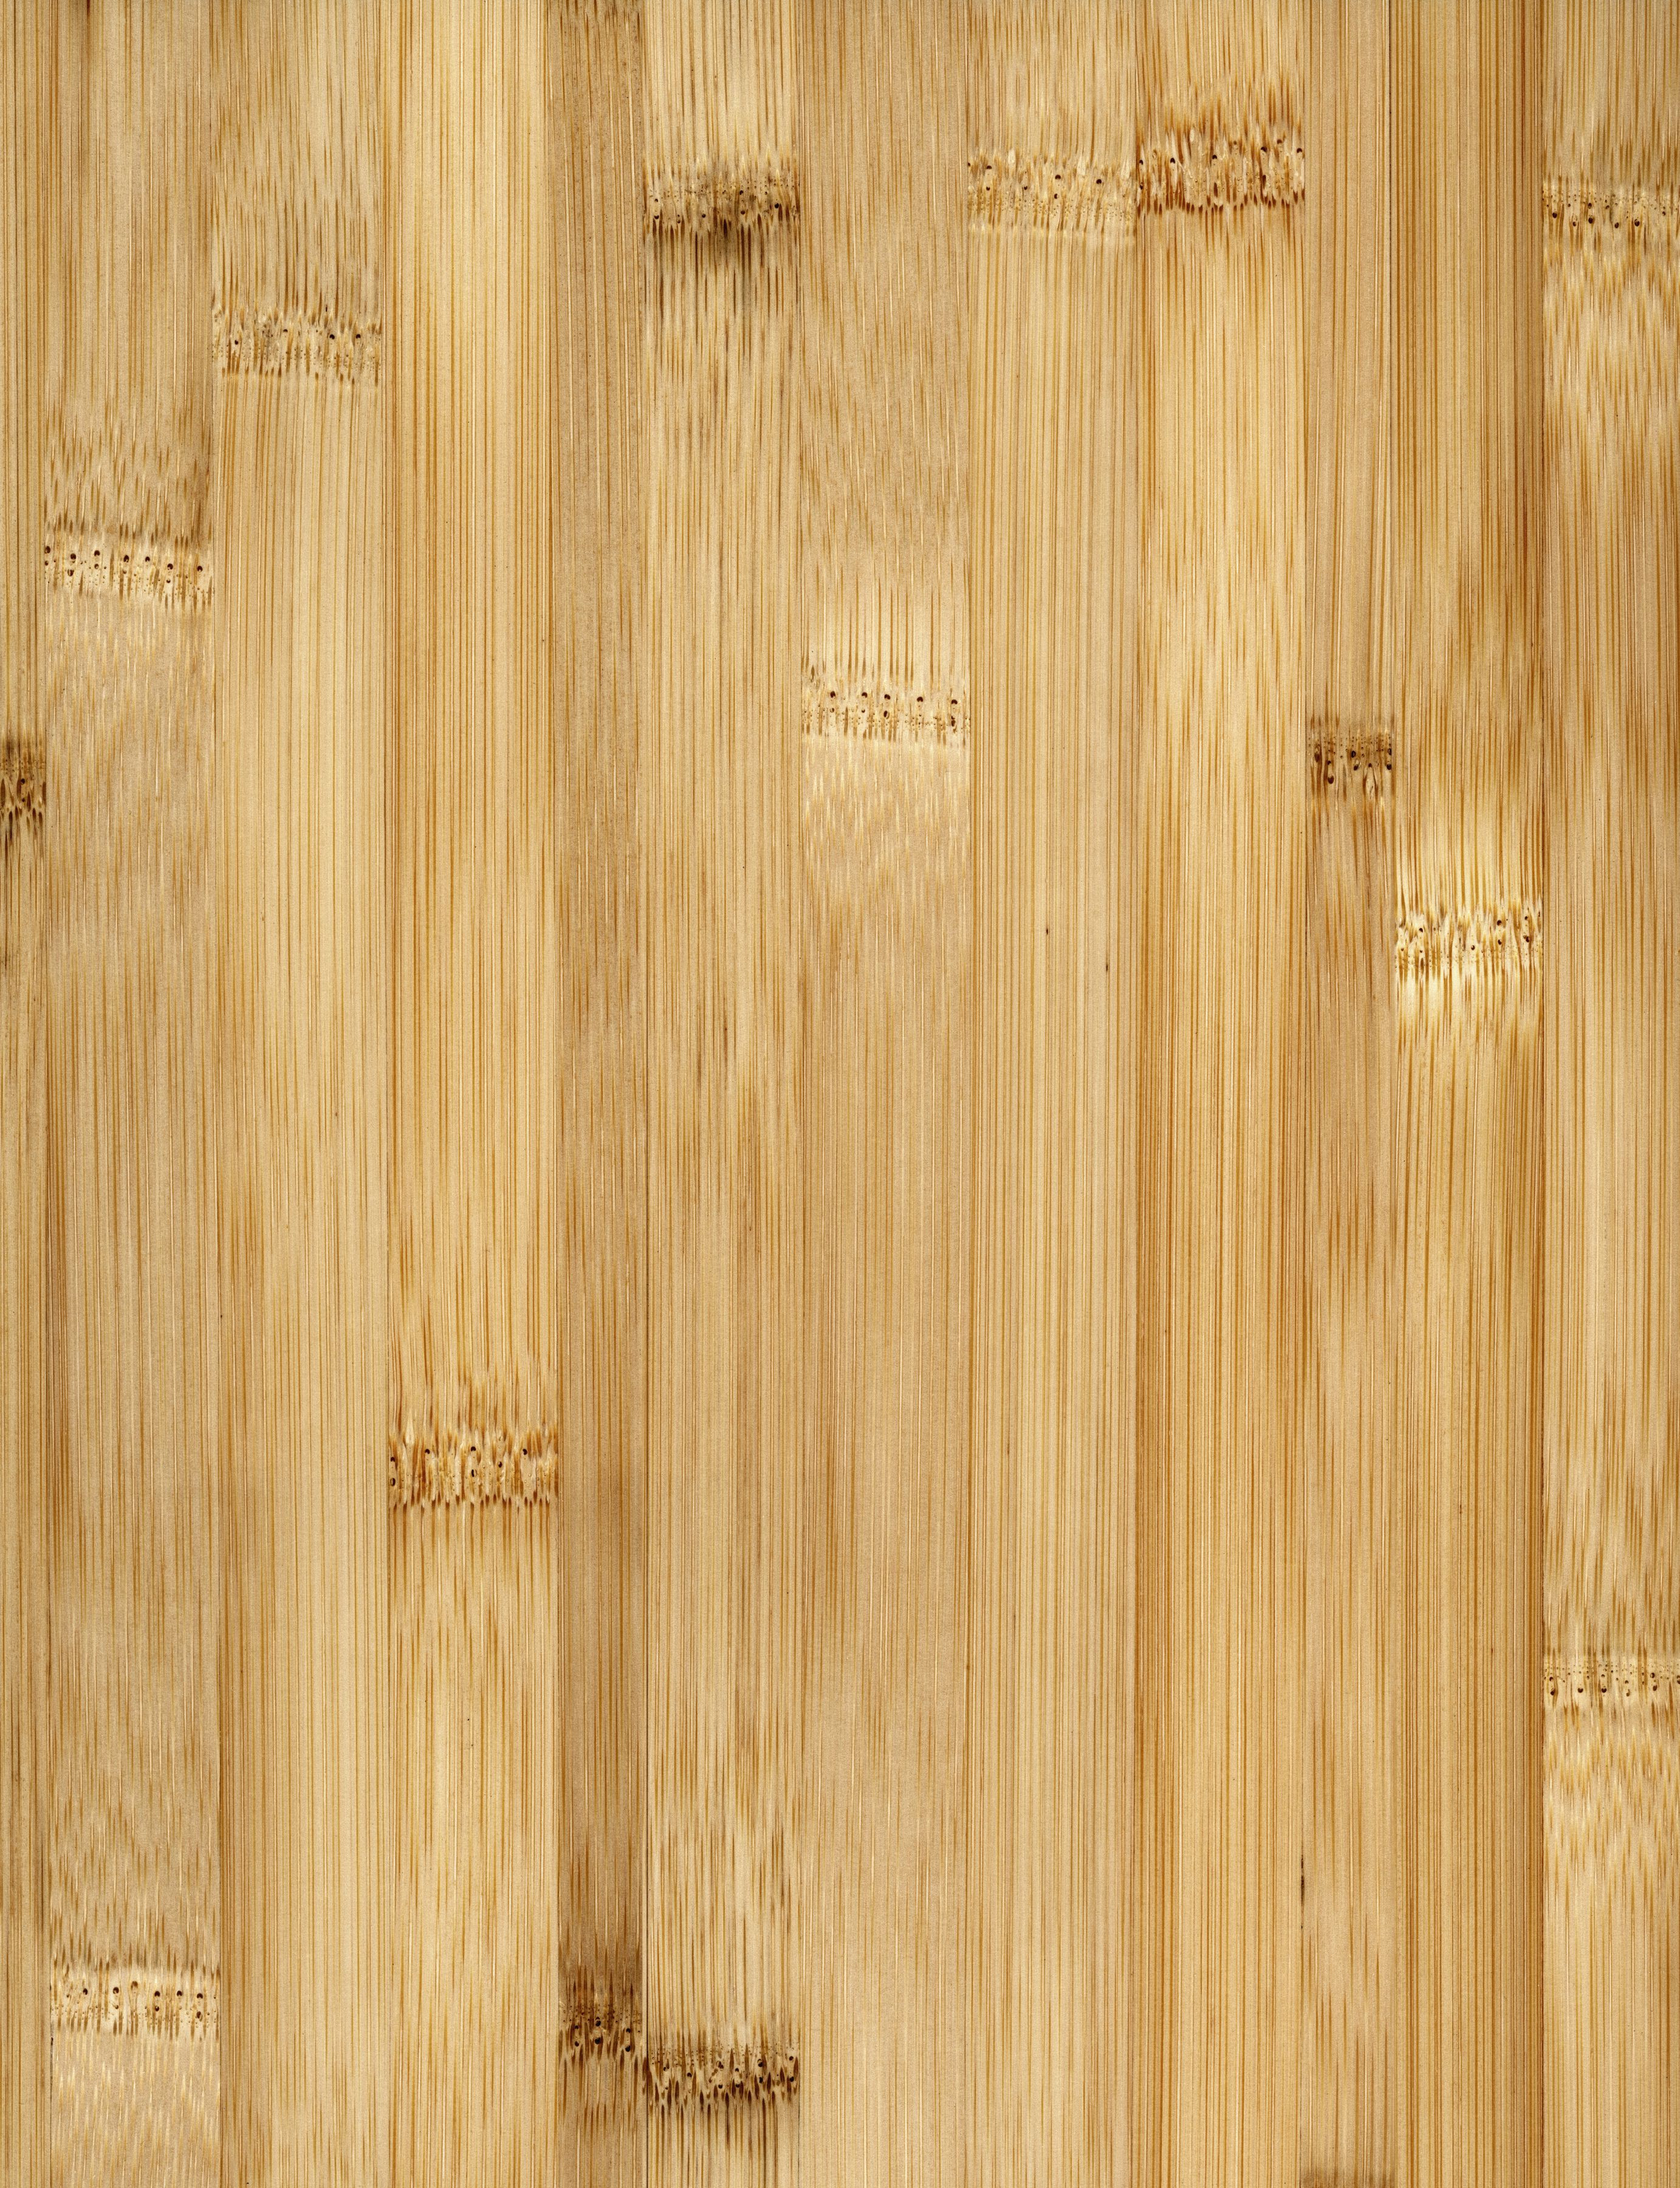 21 Trendy Hardwood Floor Material Cost 2024 free download hardwood floor material cost of bamboo flooring buying guide throughout bamboo floor full frame 200266305 001 59a4517bd963ac00118a3d9f